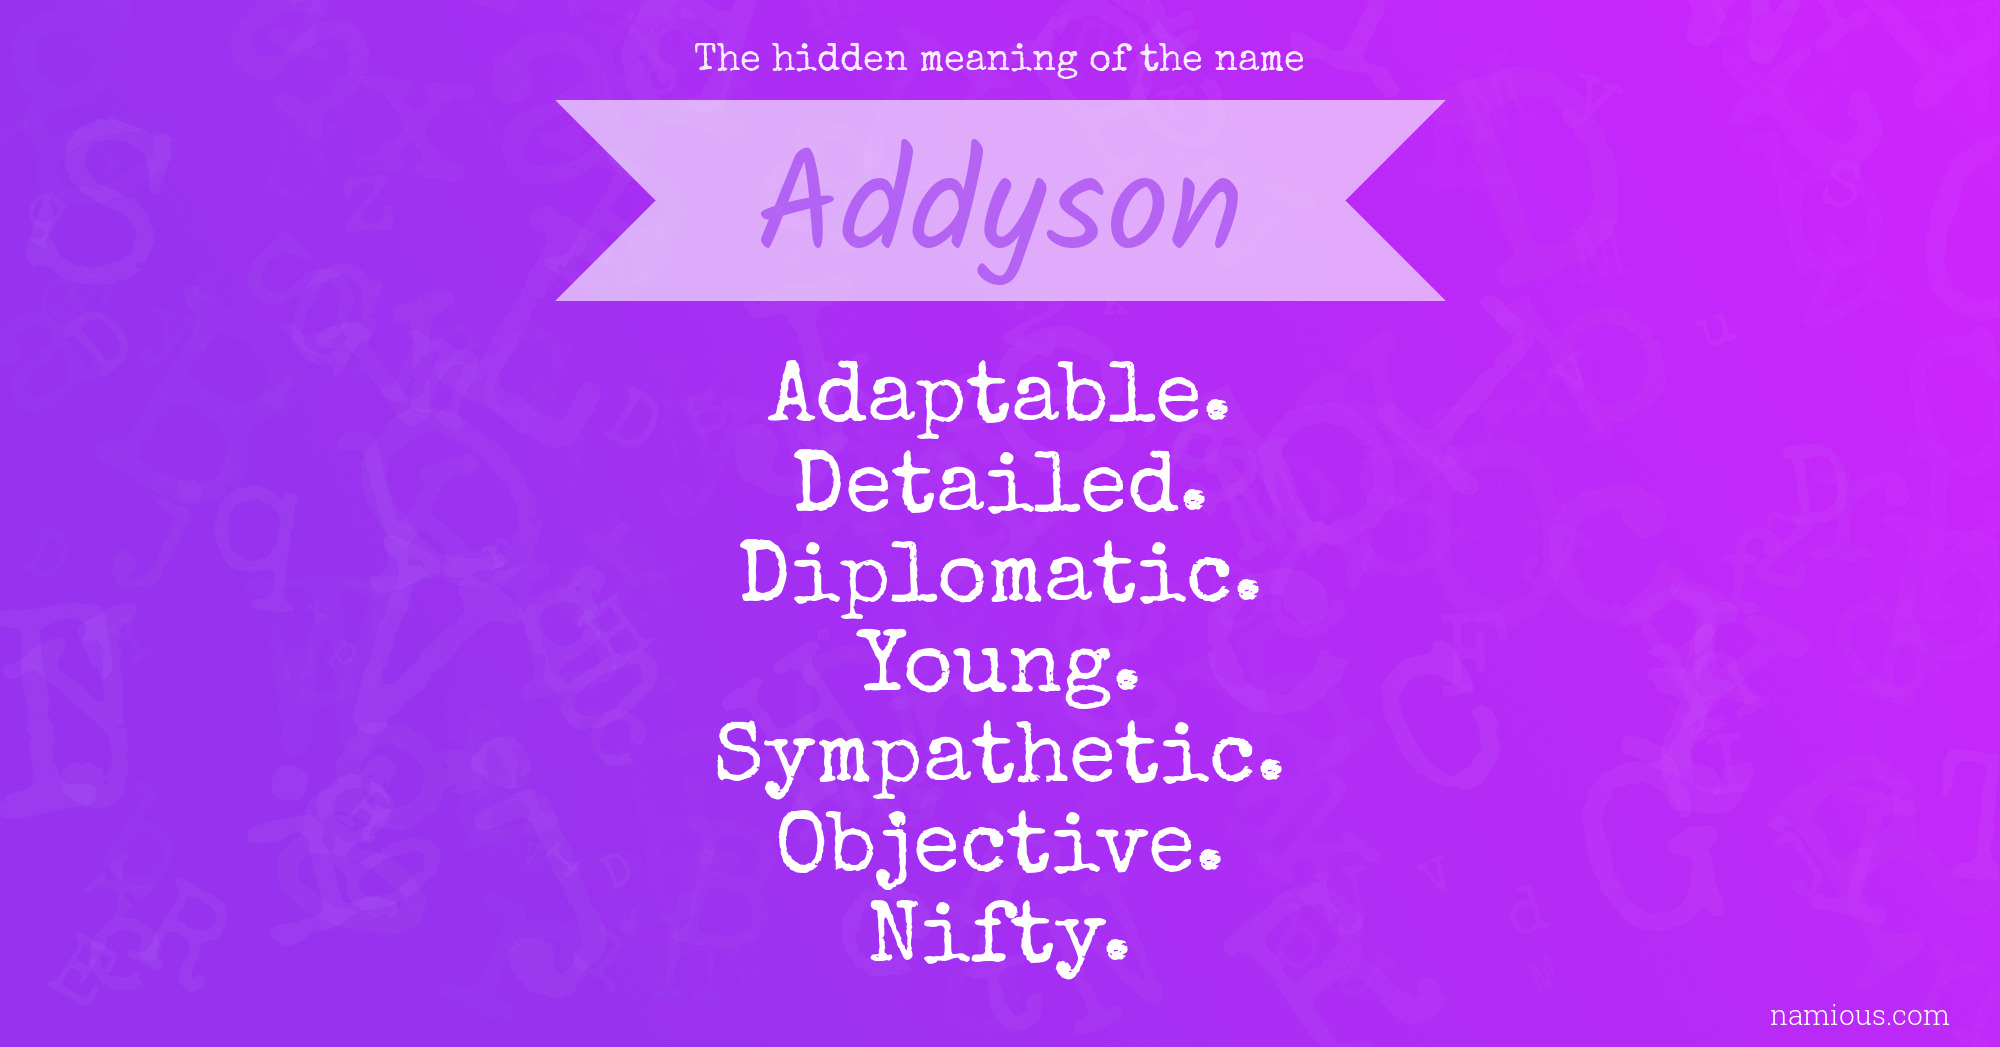 The hidden meaning of the name Addyson